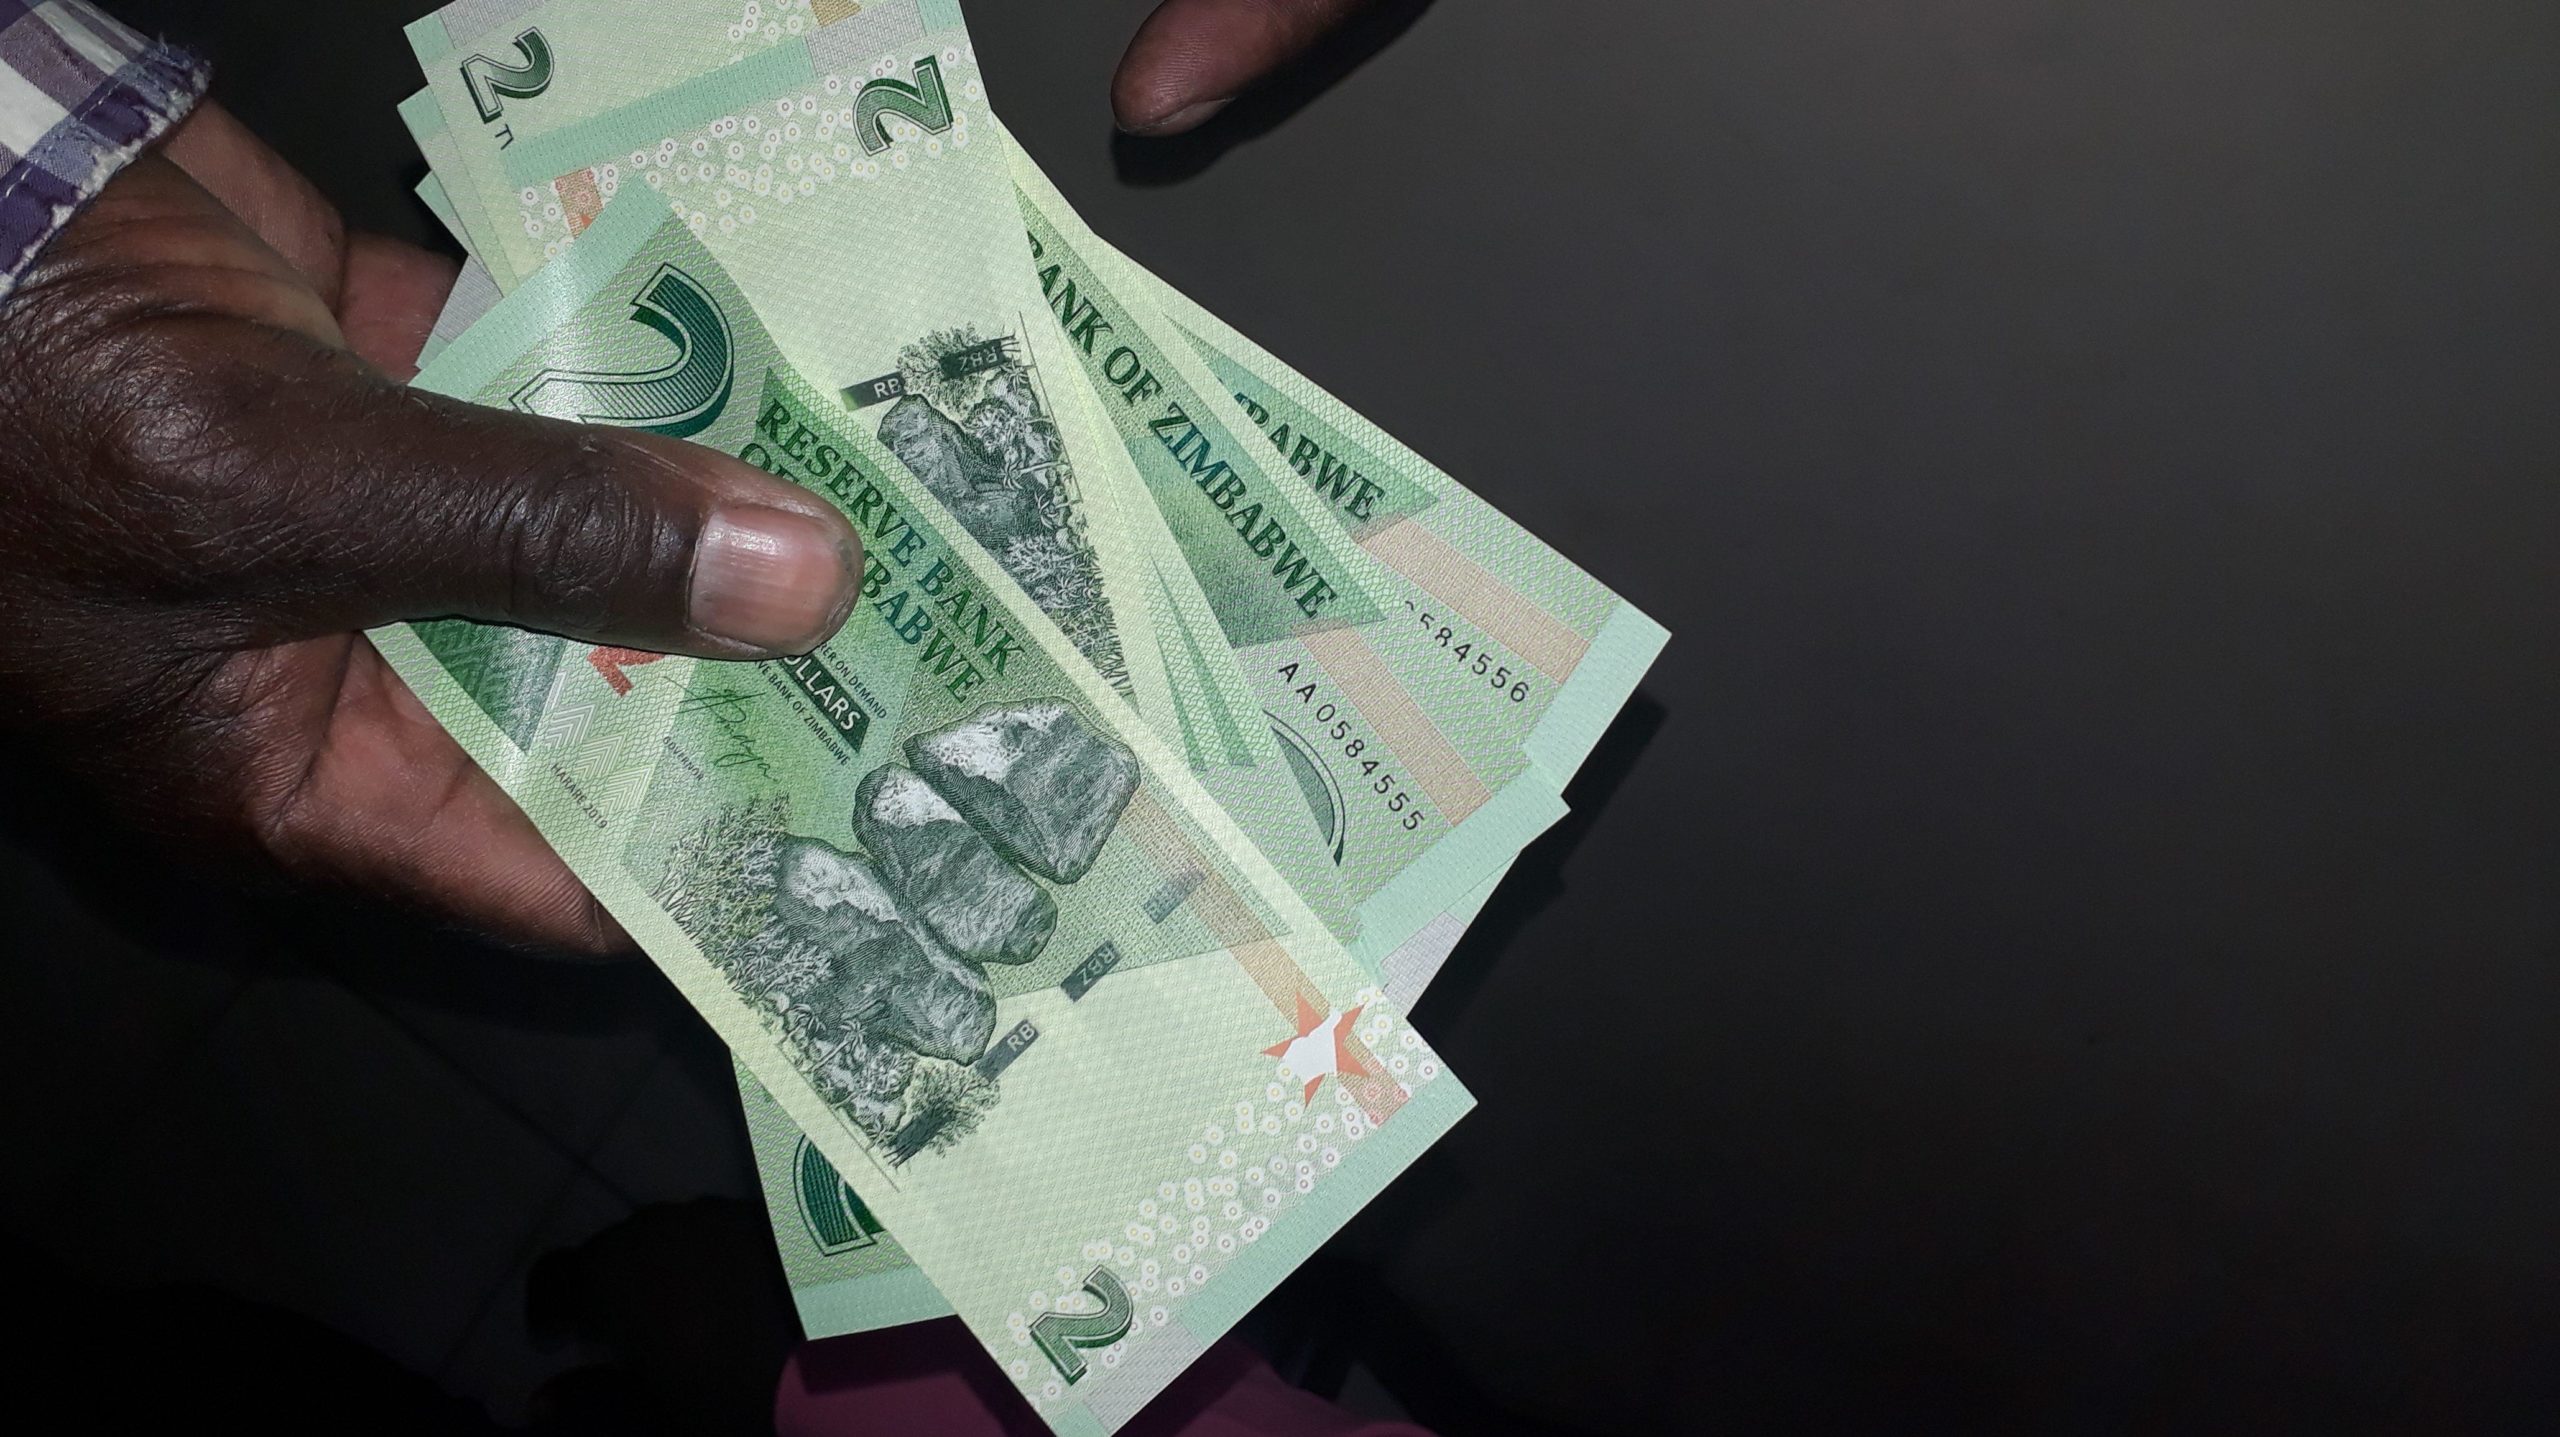 Zimbabwe fears hyperinflation with new notes, but needs EcoCash